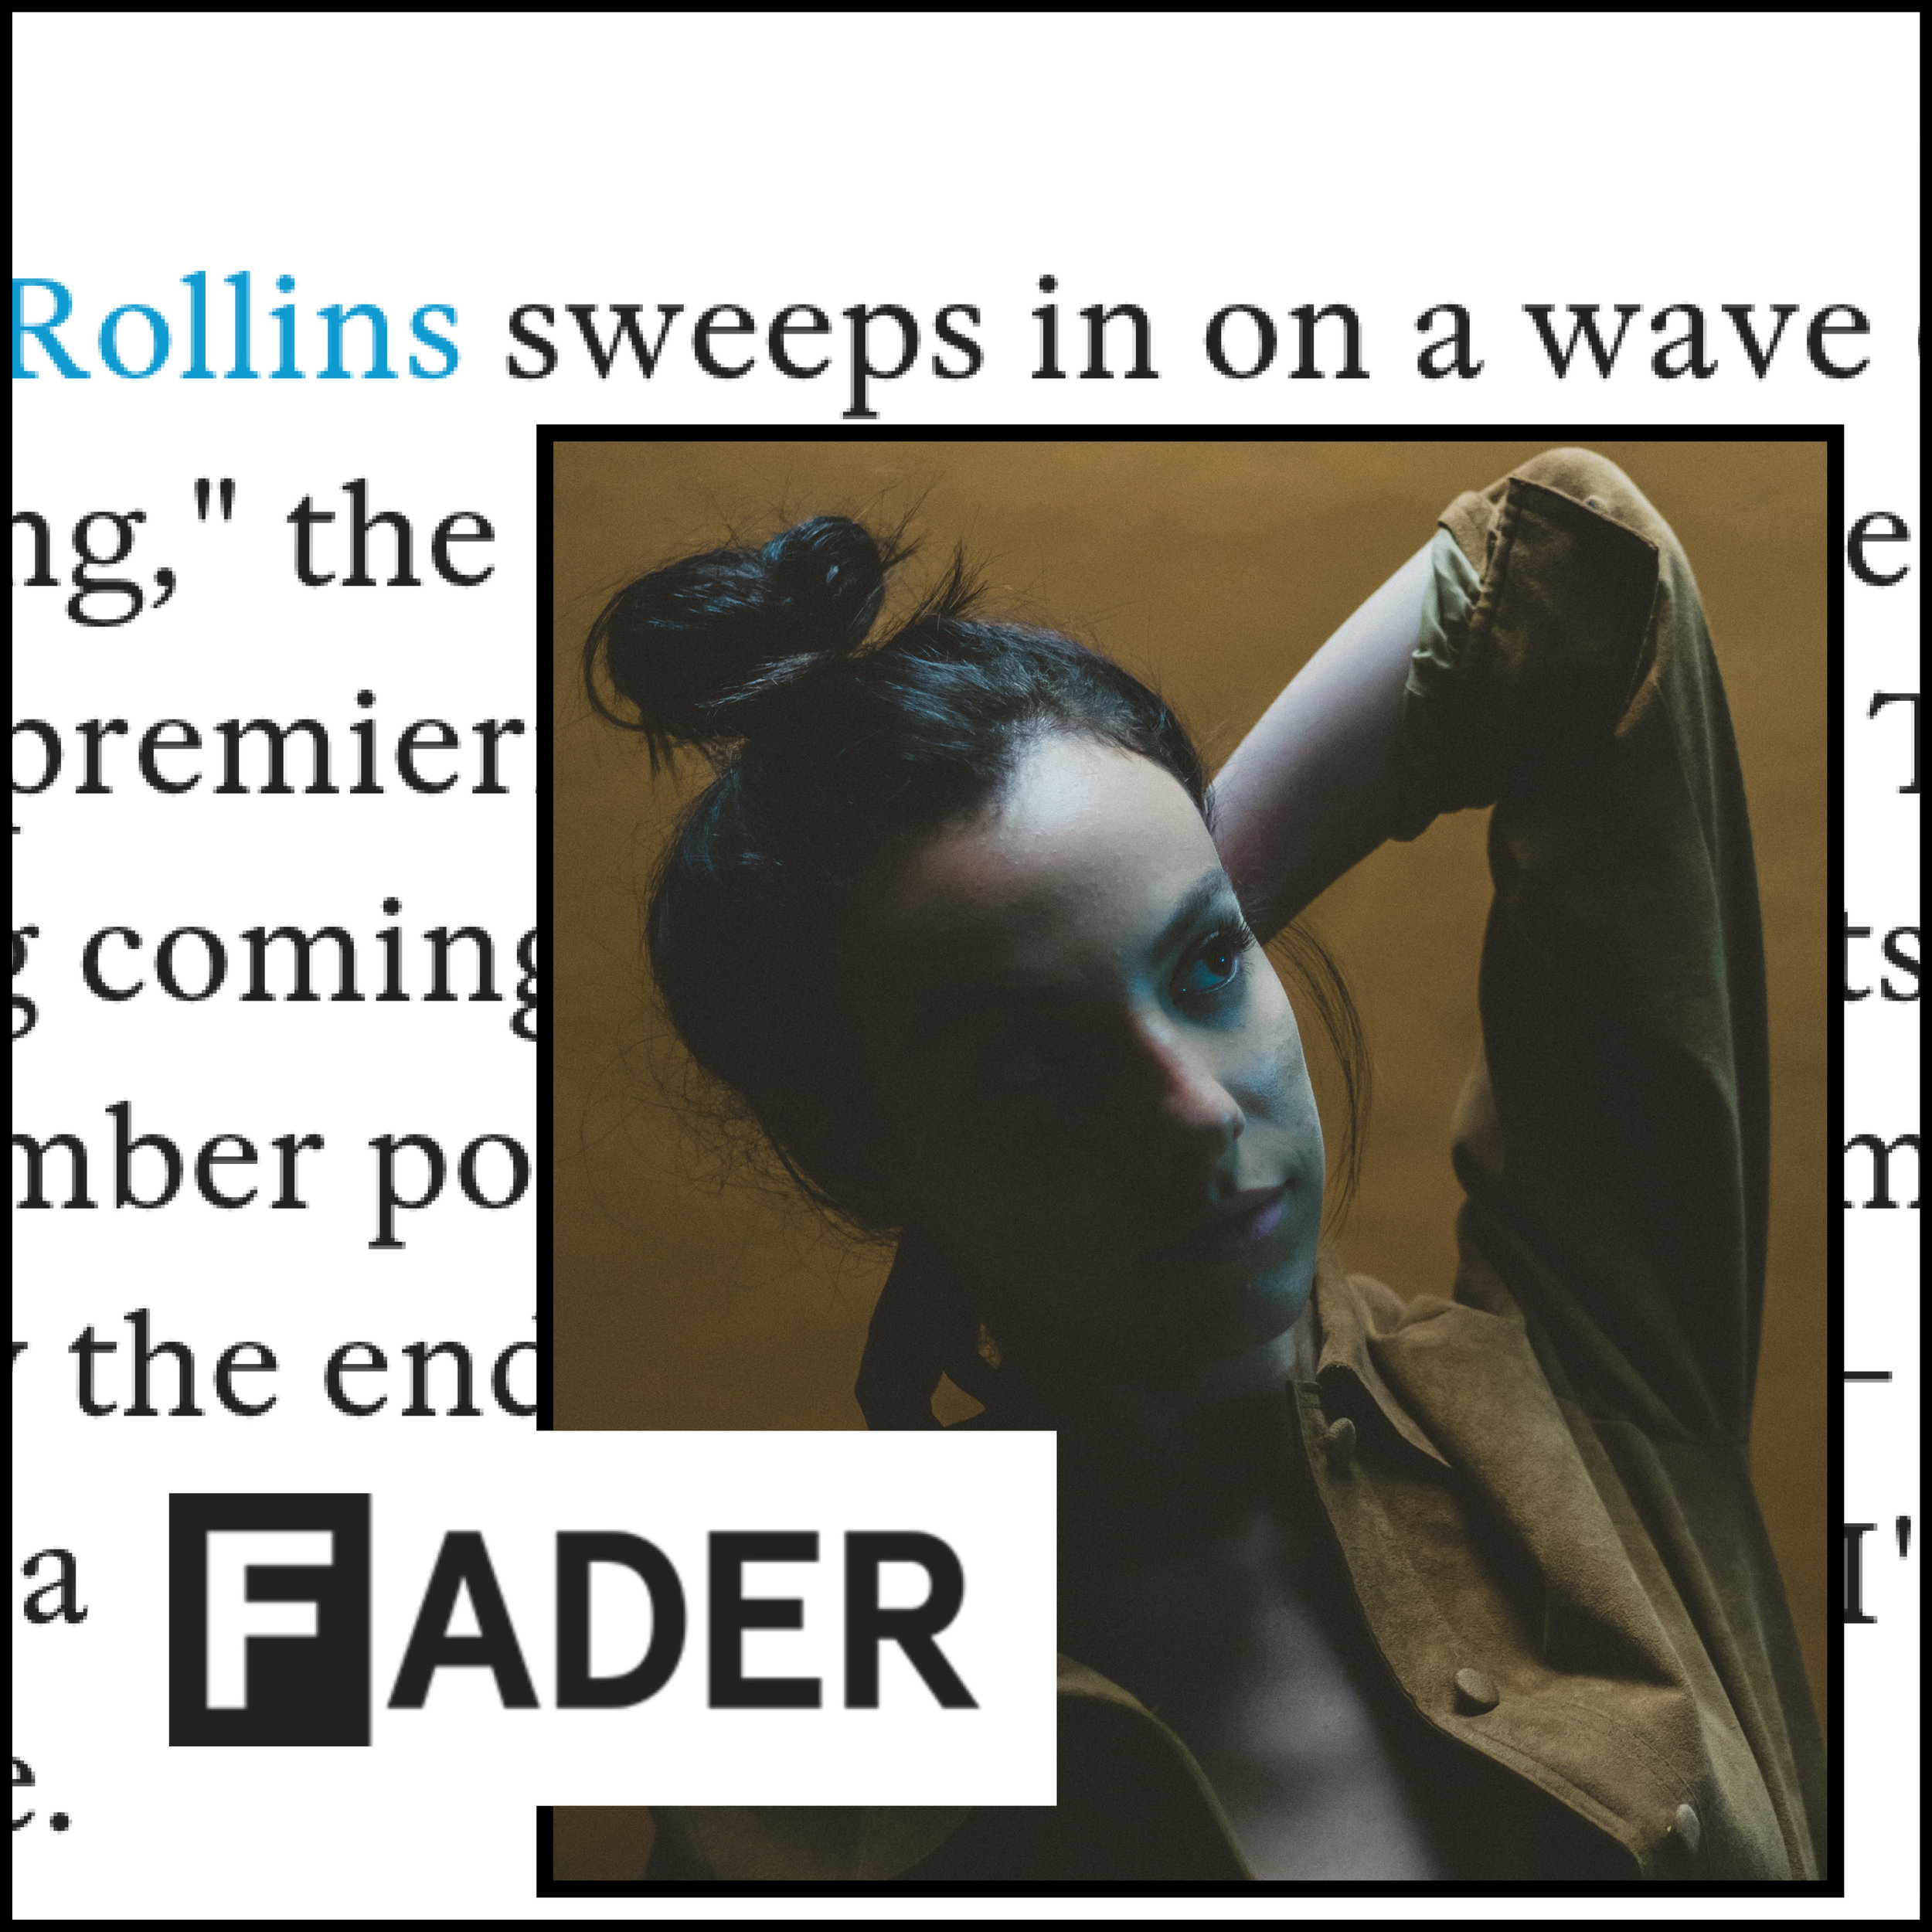  Link -  The FADER  